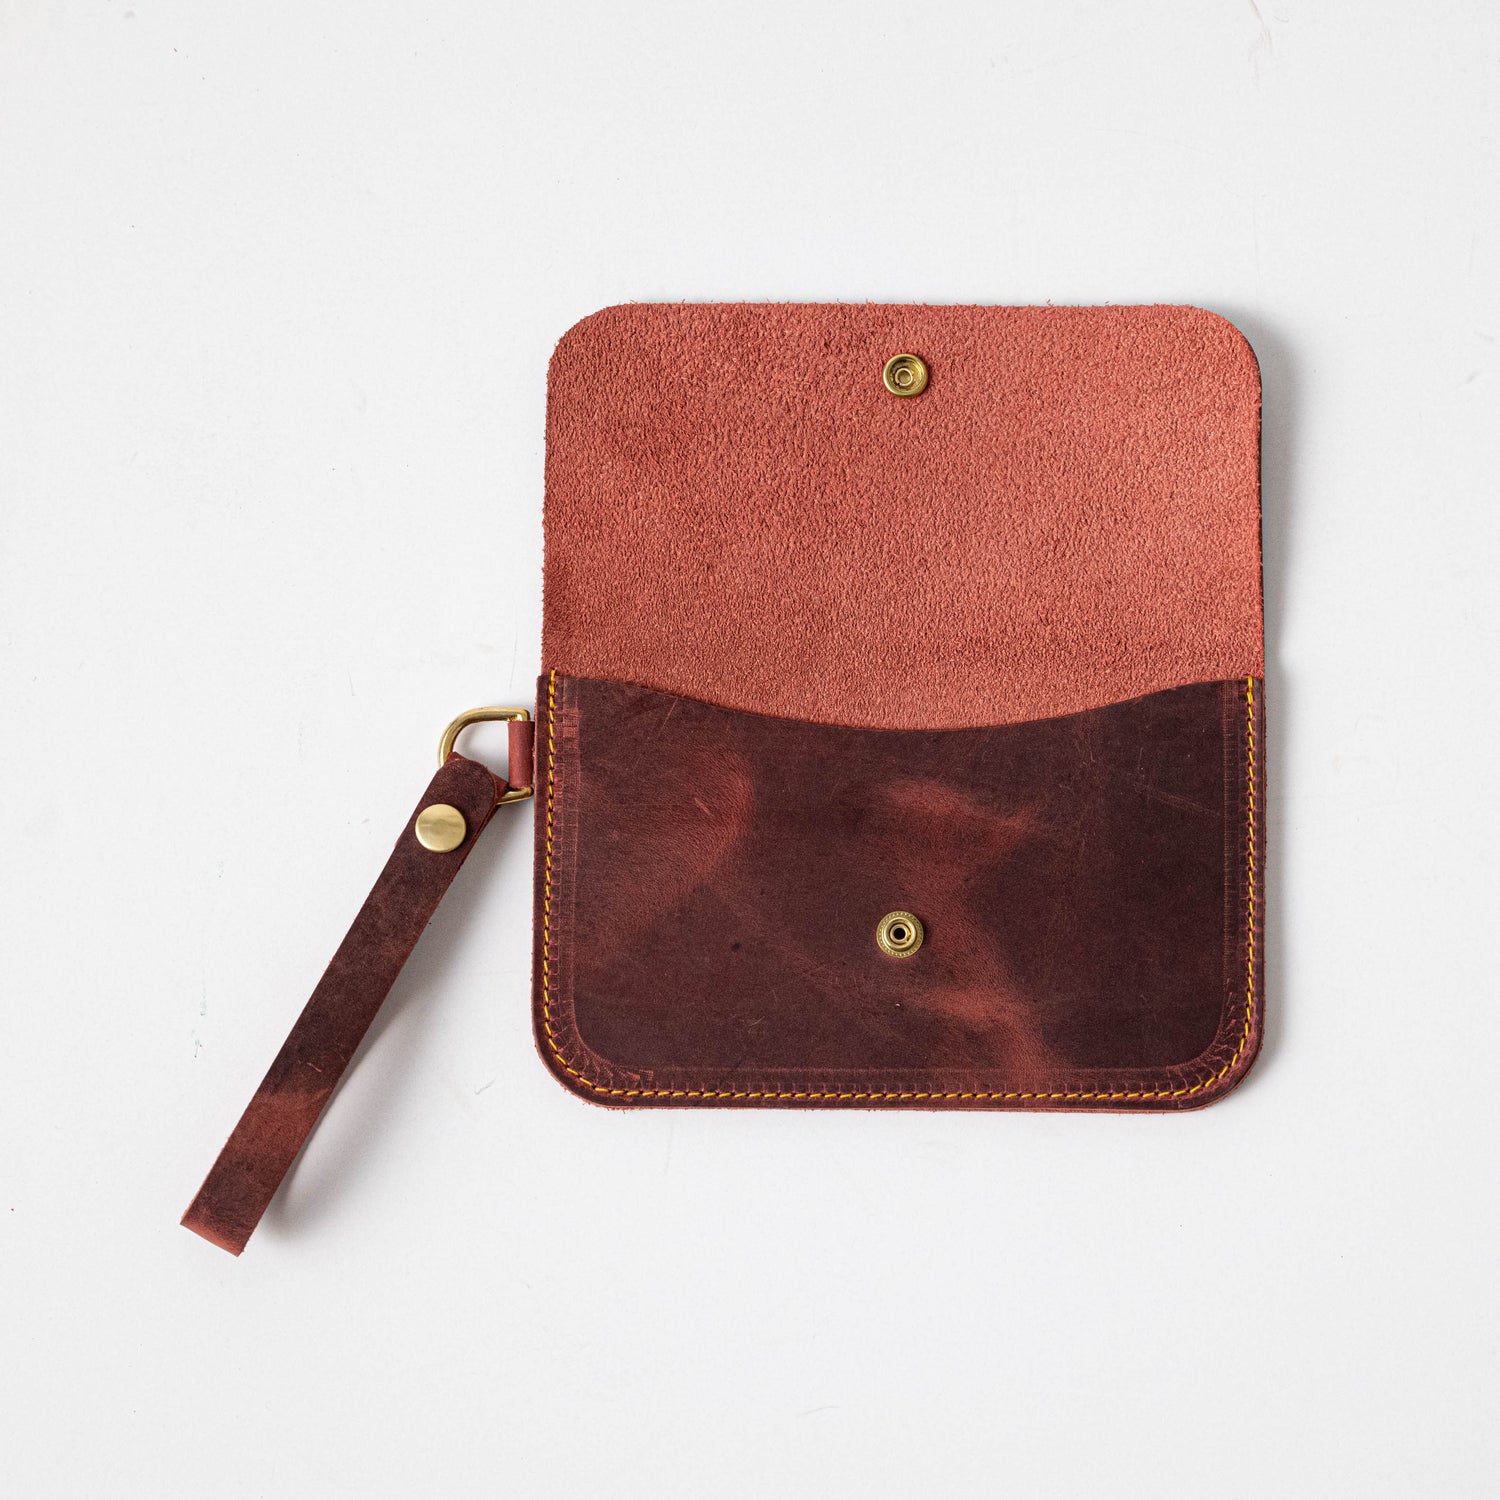 Mulberry Coin Purse Wallets for Women